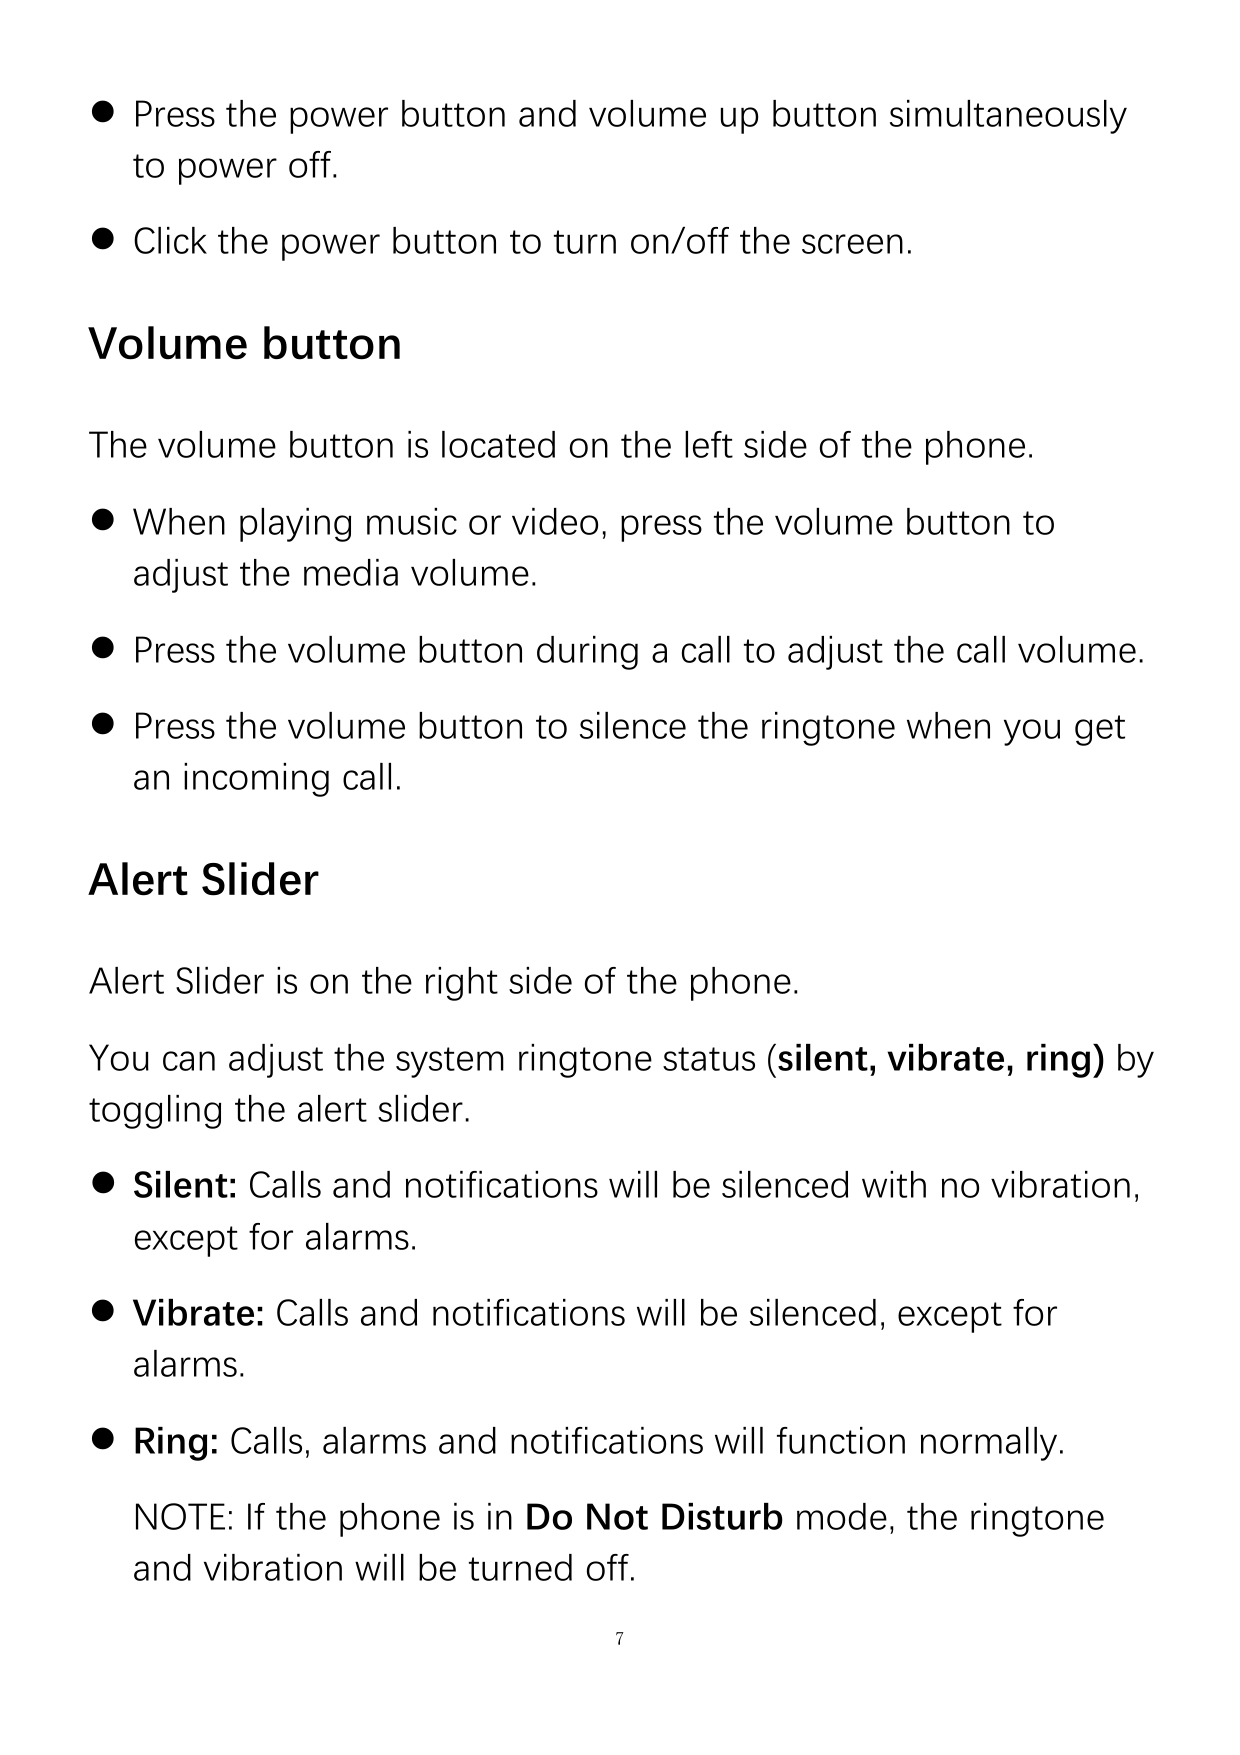  Press the power button and volume up button simultaneouslyto power off. Click the power button to turn on/off the screen.Volu